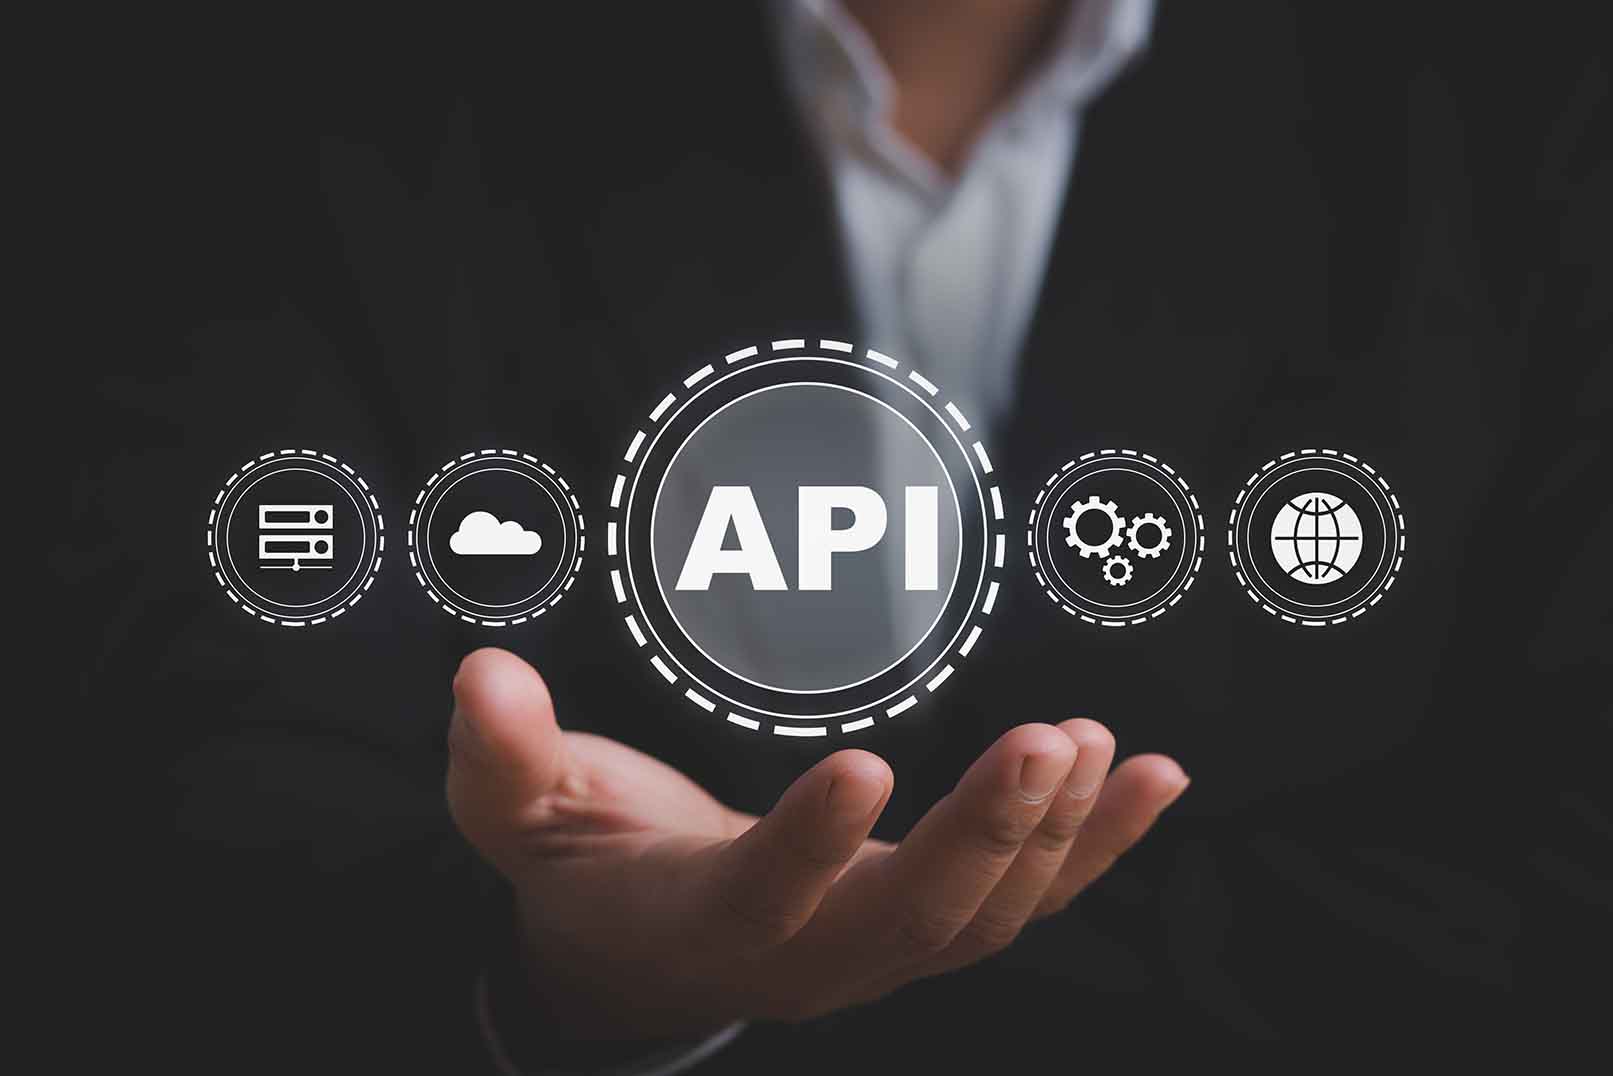 Challenges of Working with APIs from Developers’ Perspective